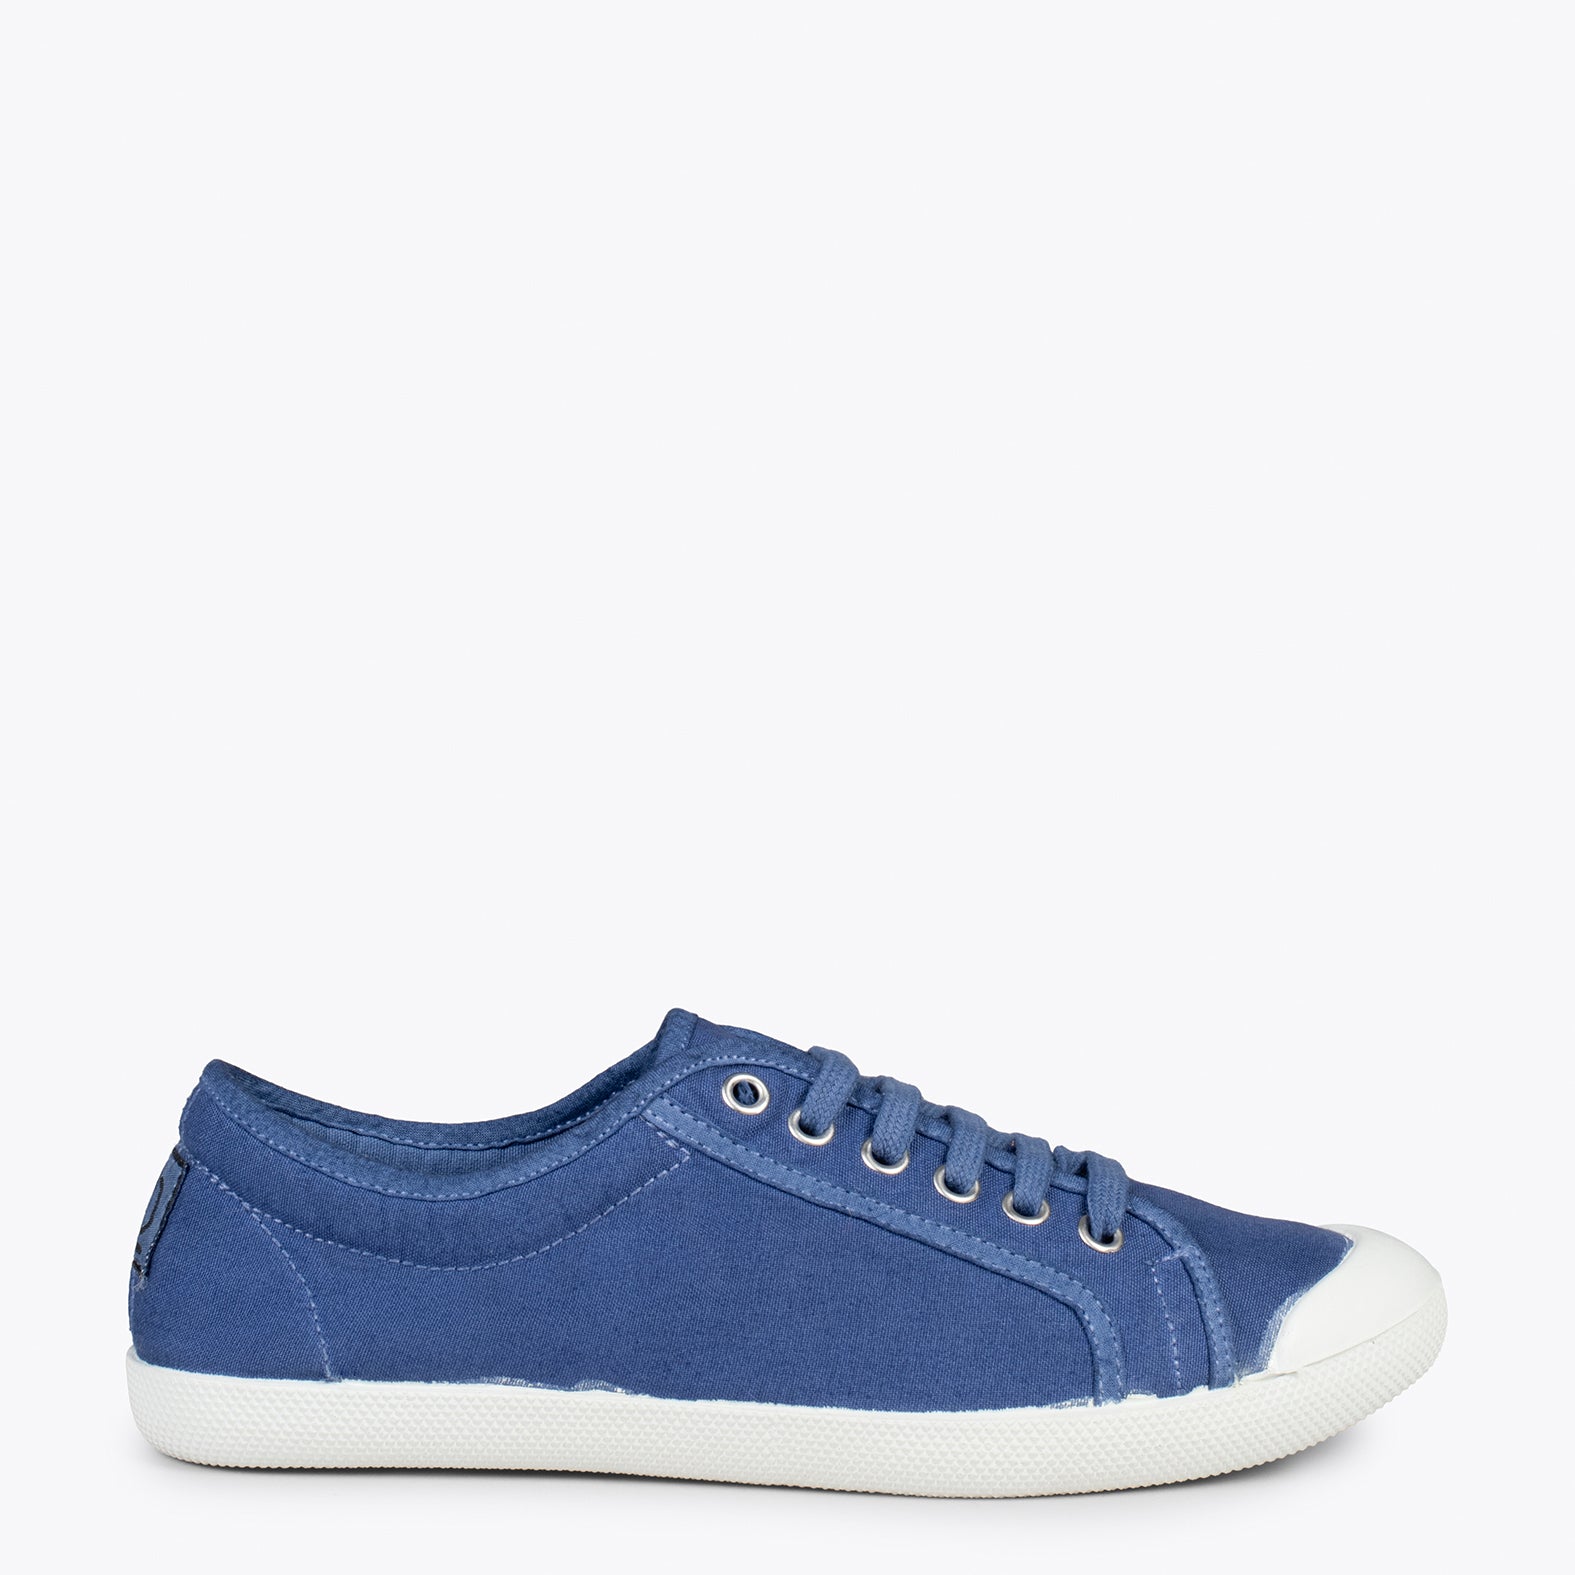 BAOBAB – JEANS BCI cotton sneakers from IO&GO